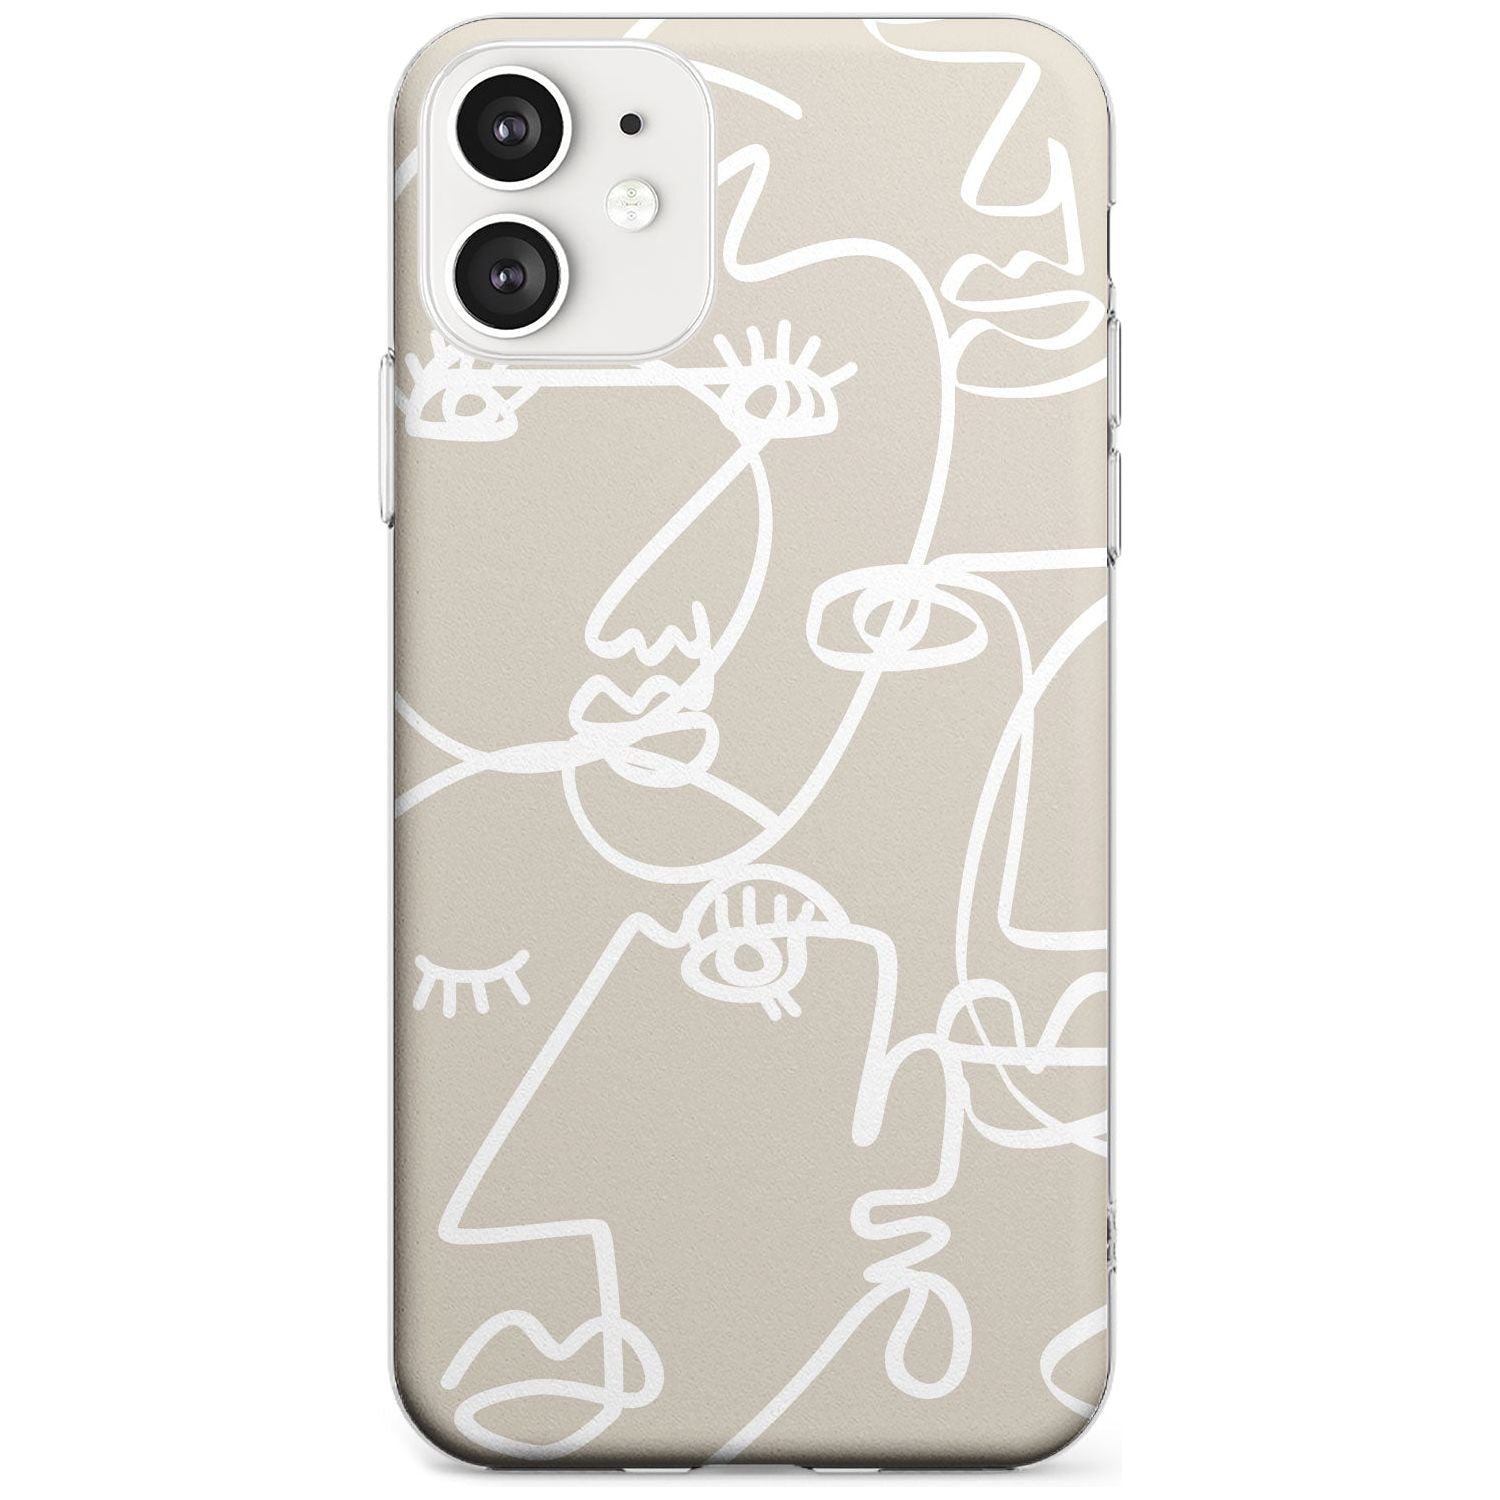 Continuous Line Faces: White on Beige Black Impact Phone Case for iPhone 11